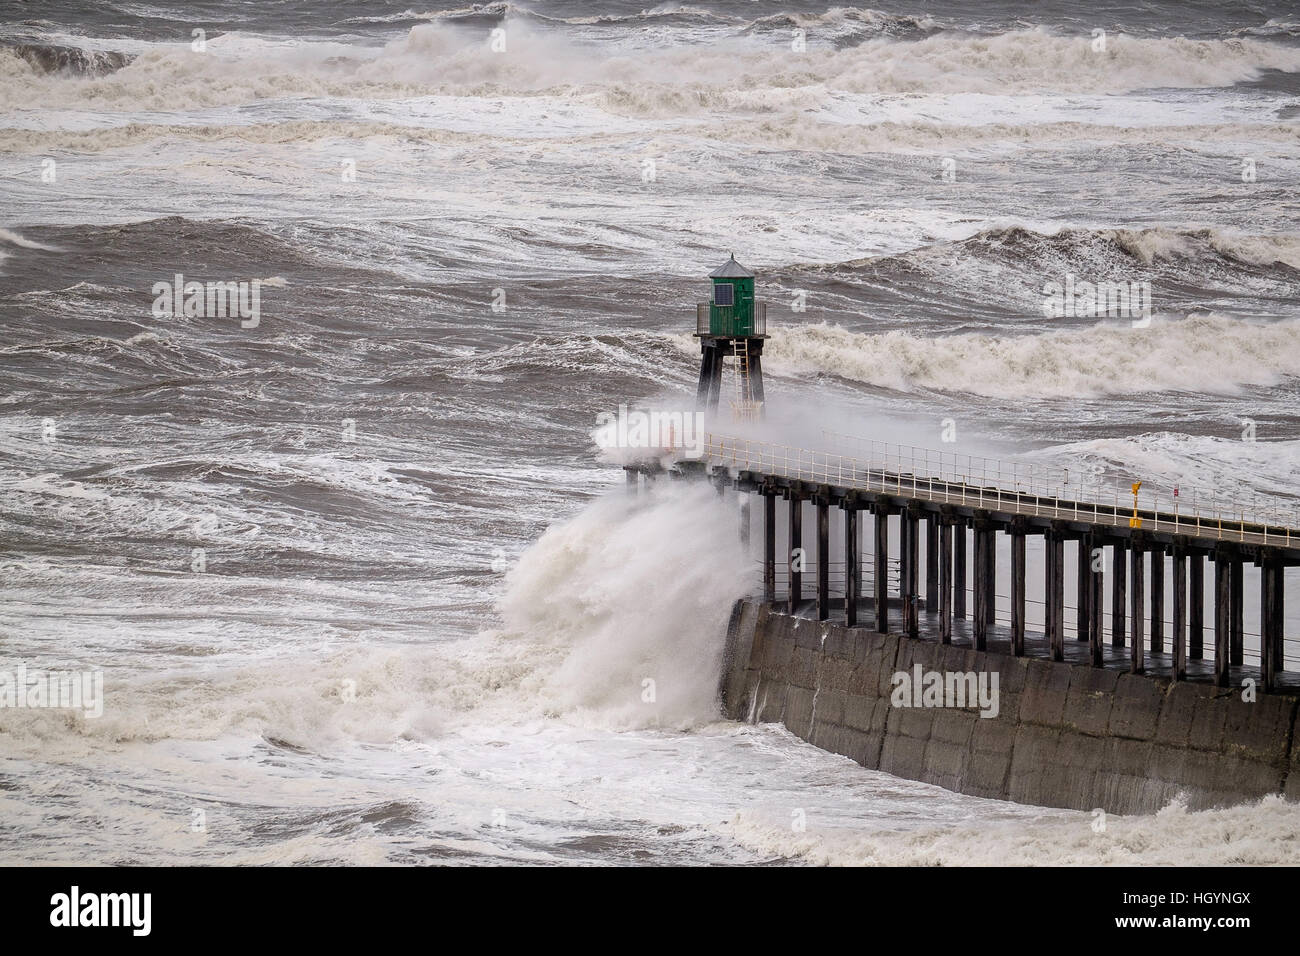 UK Weather. Whitby, North Yorkshire, UK. 13th January 2017. Rough seas breaking over protective piers around Whitby harbour caused by high winds in North-east England. Copyright Ian Wray Stock Photo